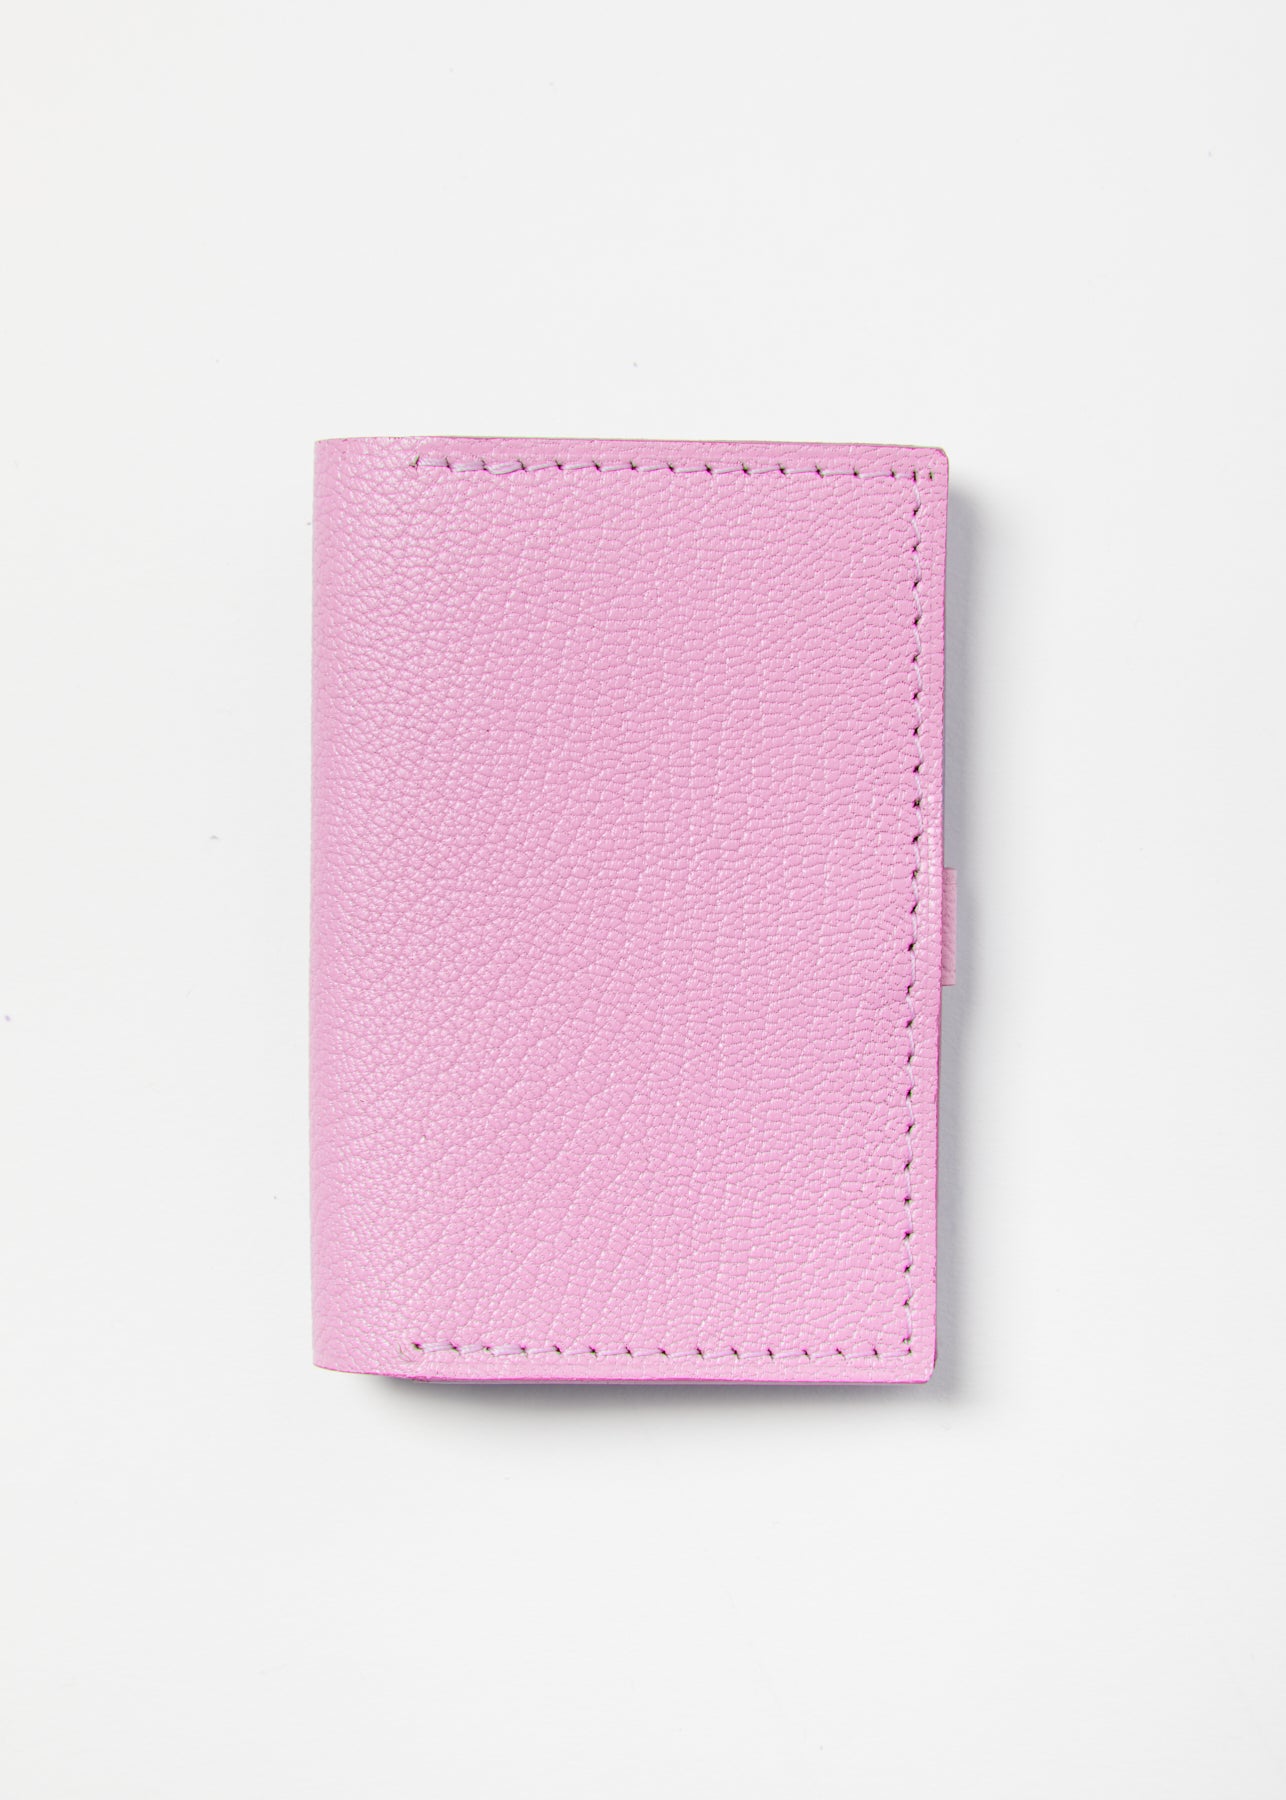 Card Wallet - Cotton Candy